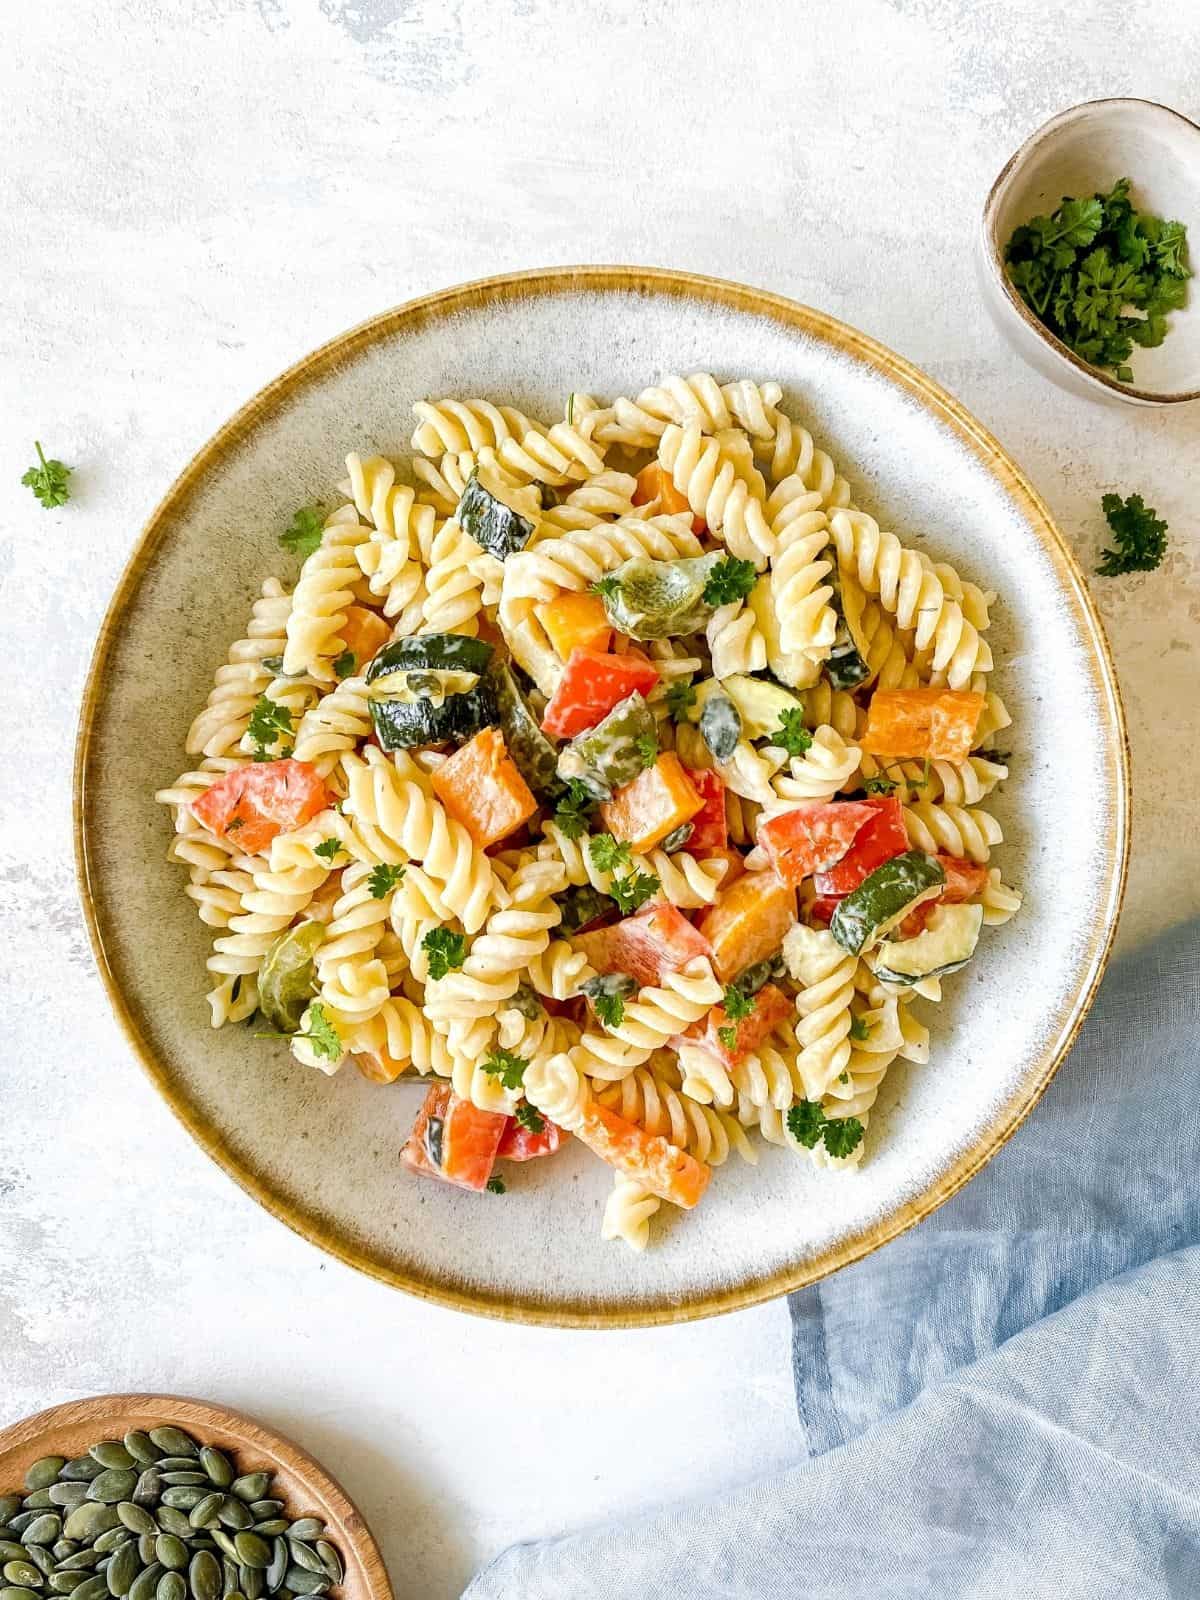 roasted vegetable pasta salad in a grey bowl on a blue linen cloth.